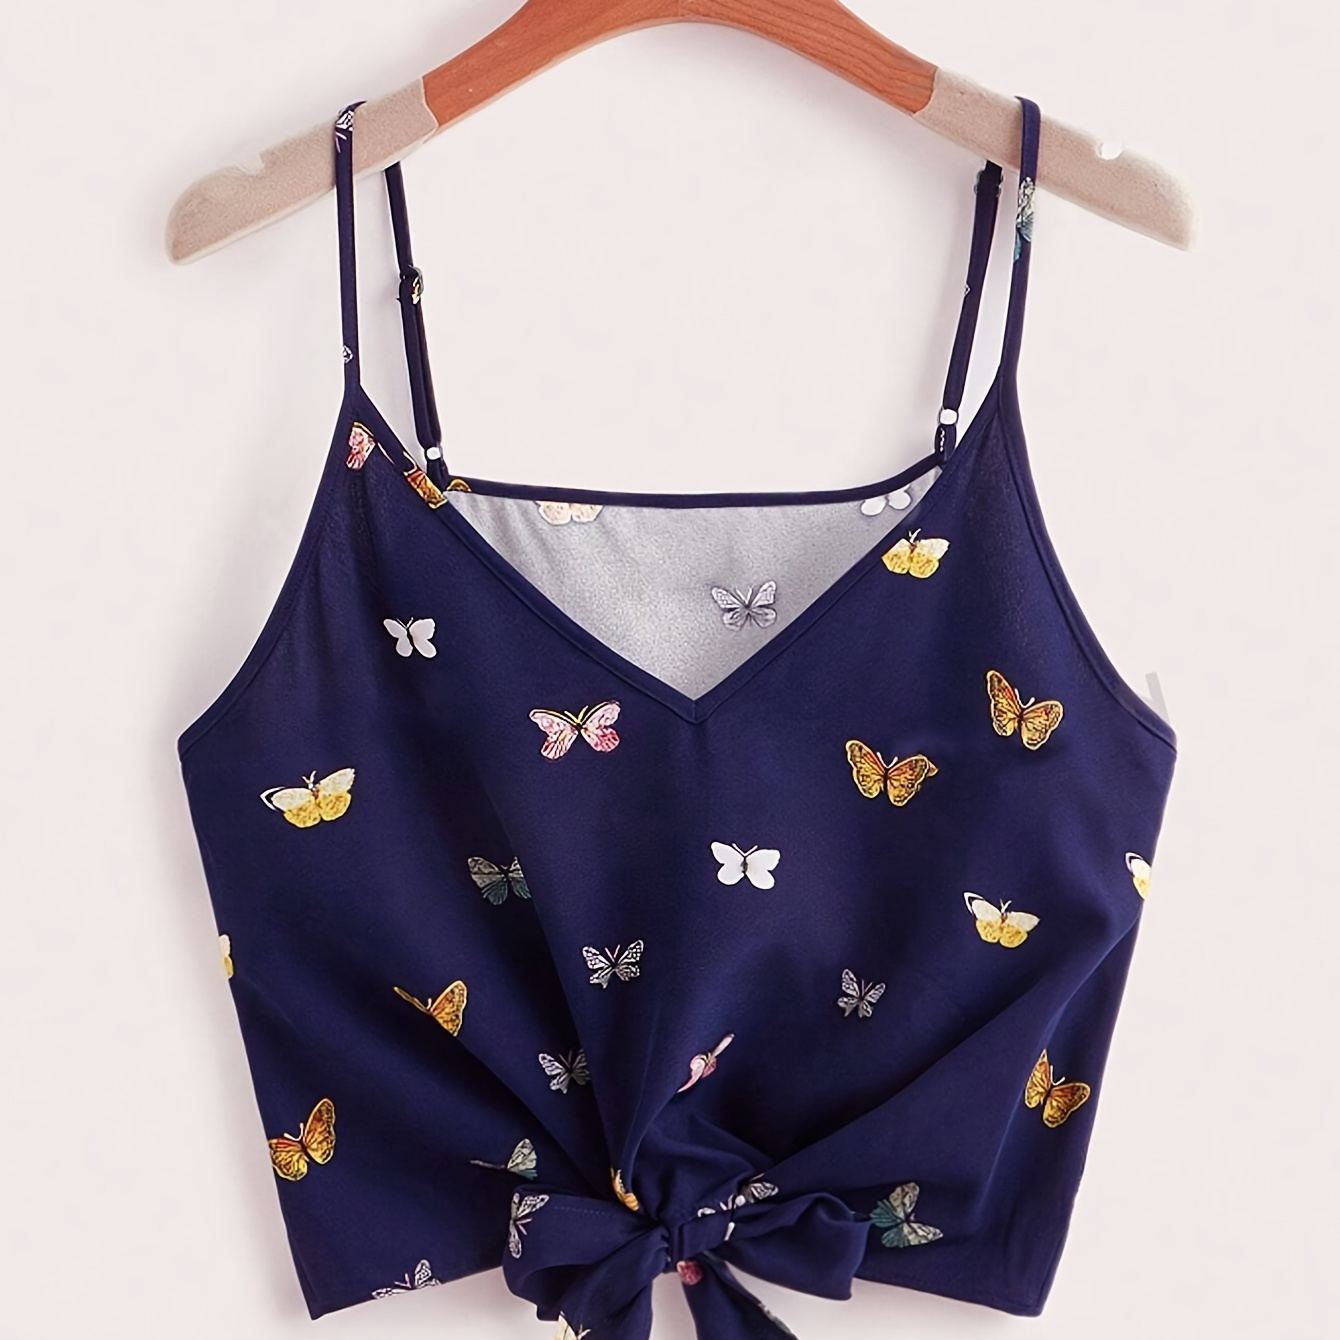 

Butterfly Print Knotted Front Cami Top, Elegant Sleeveless Crop Top For Spring & Summer, Women's Clothing